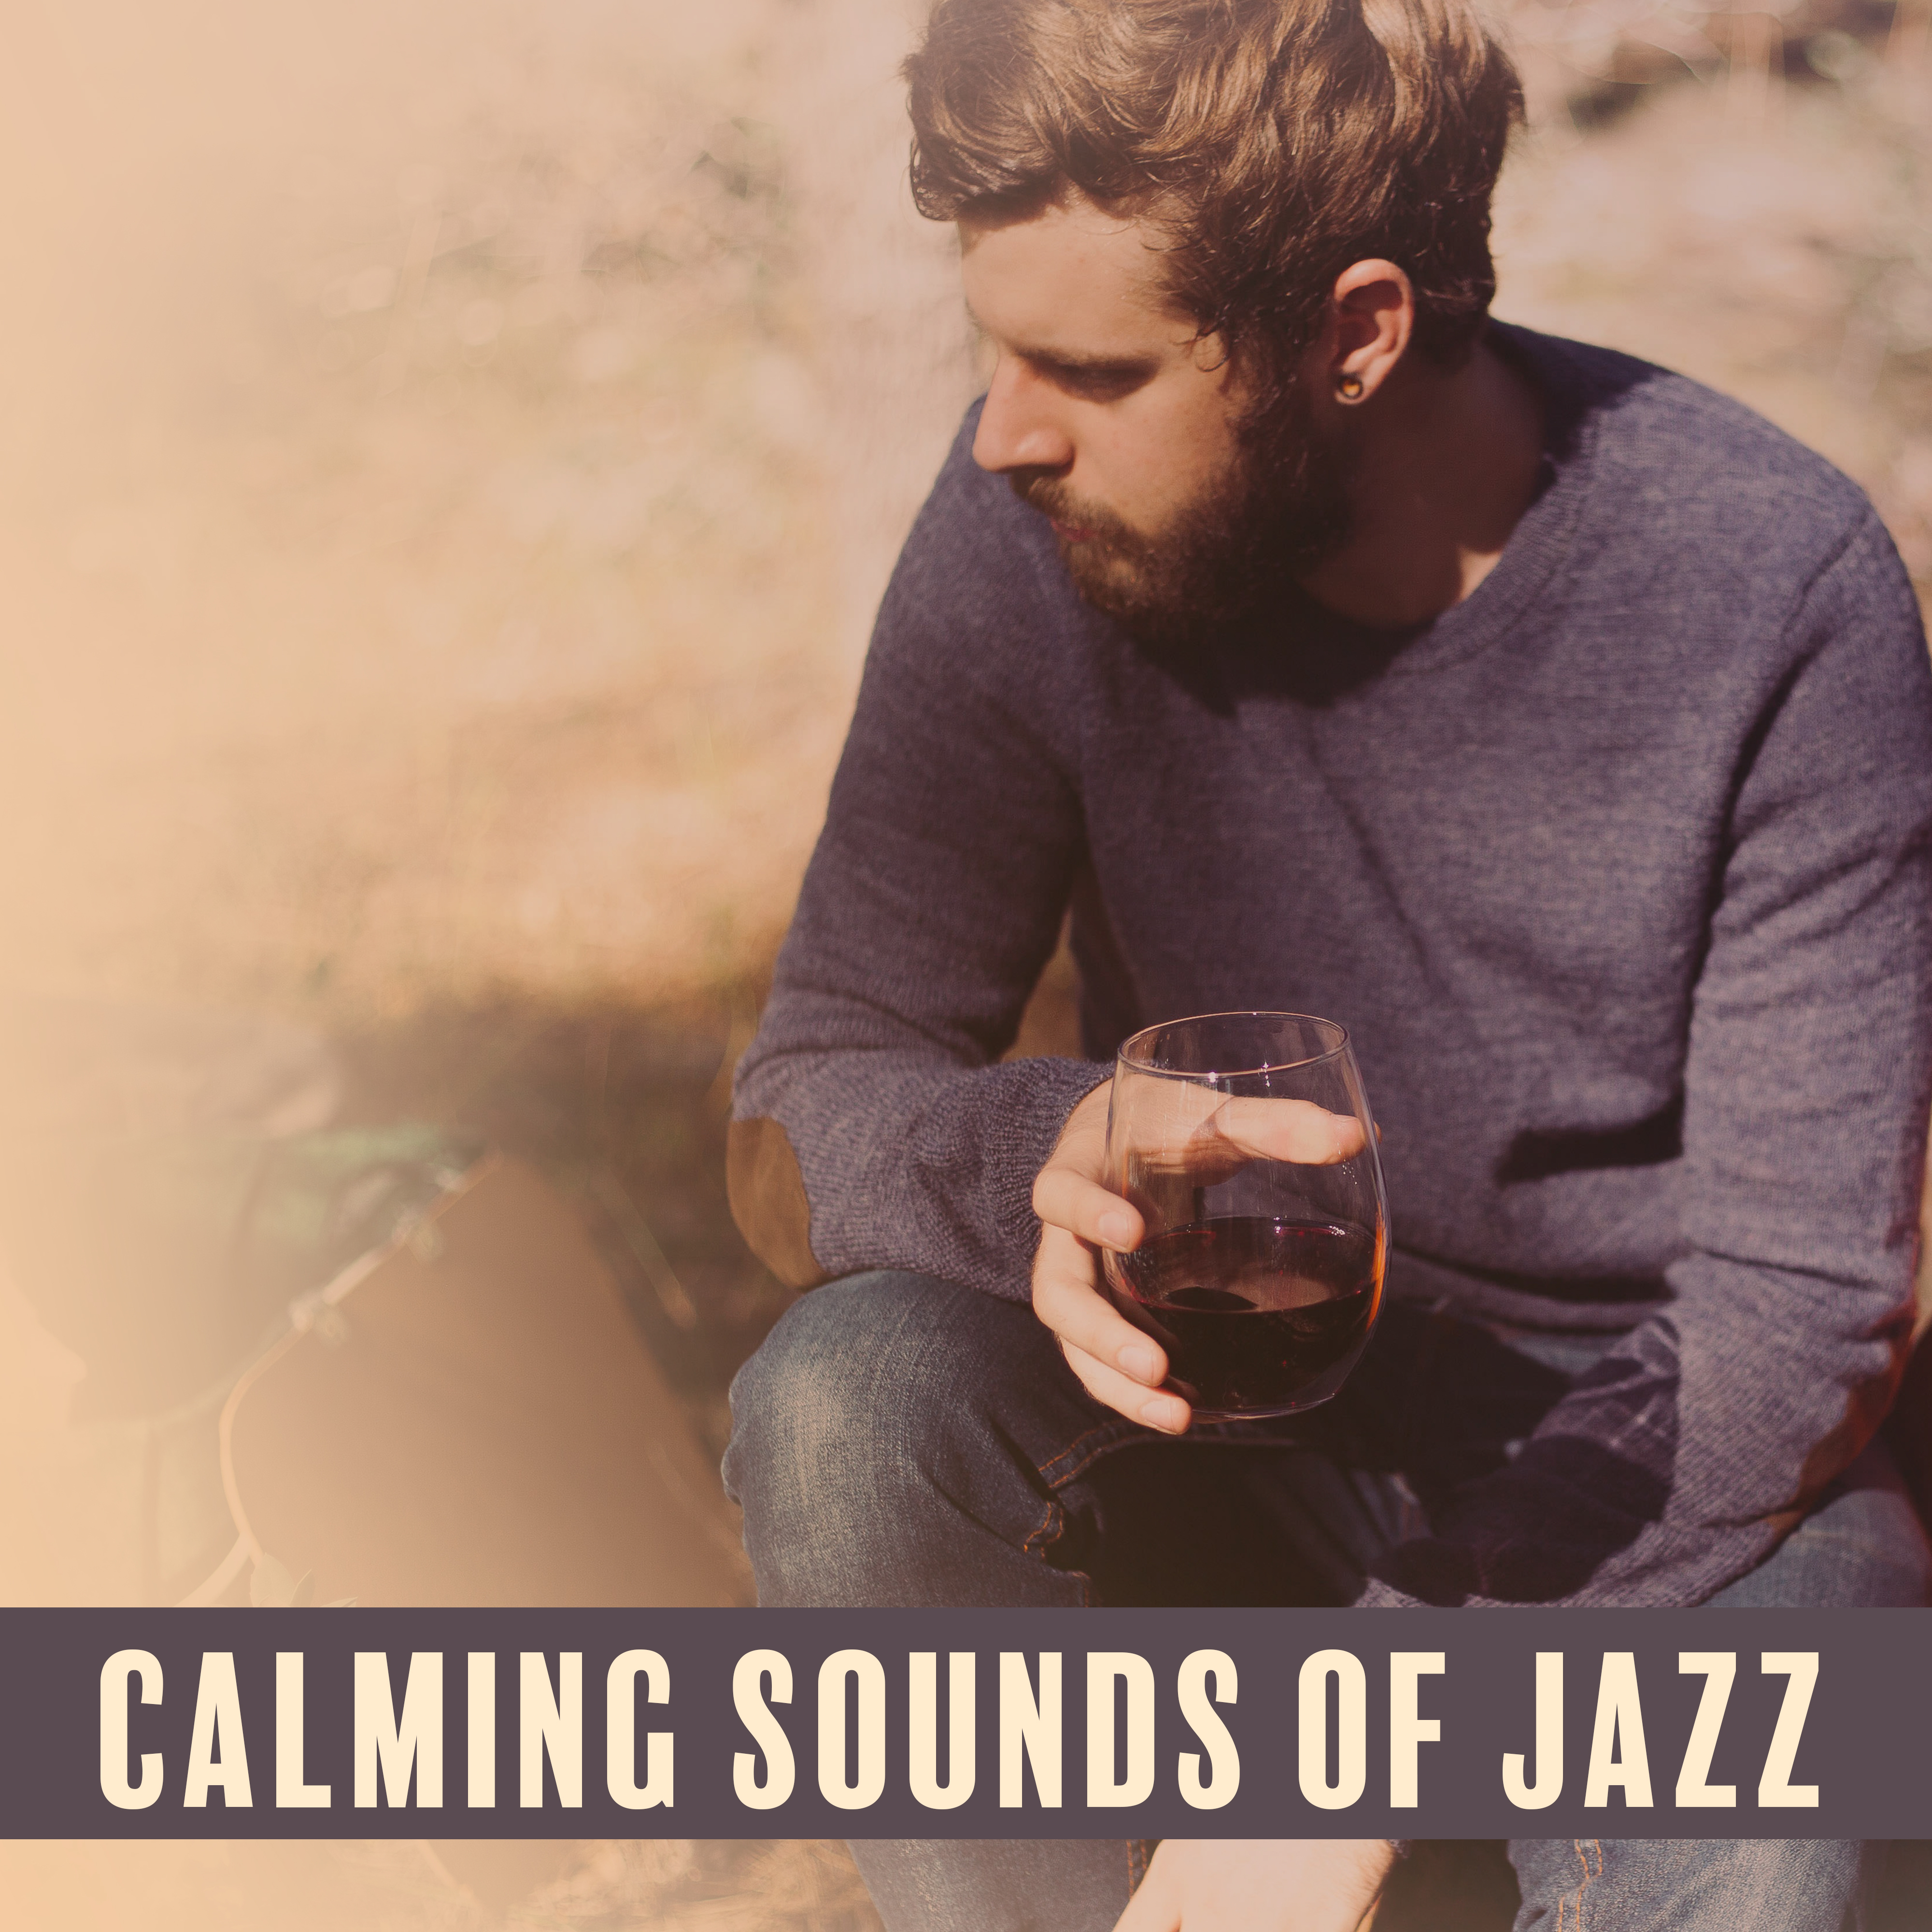 Calming Sounds of Jazz  Soothing Sounds to Relax, Rest with Jazz, Piano Bar, Music for Better Feeling